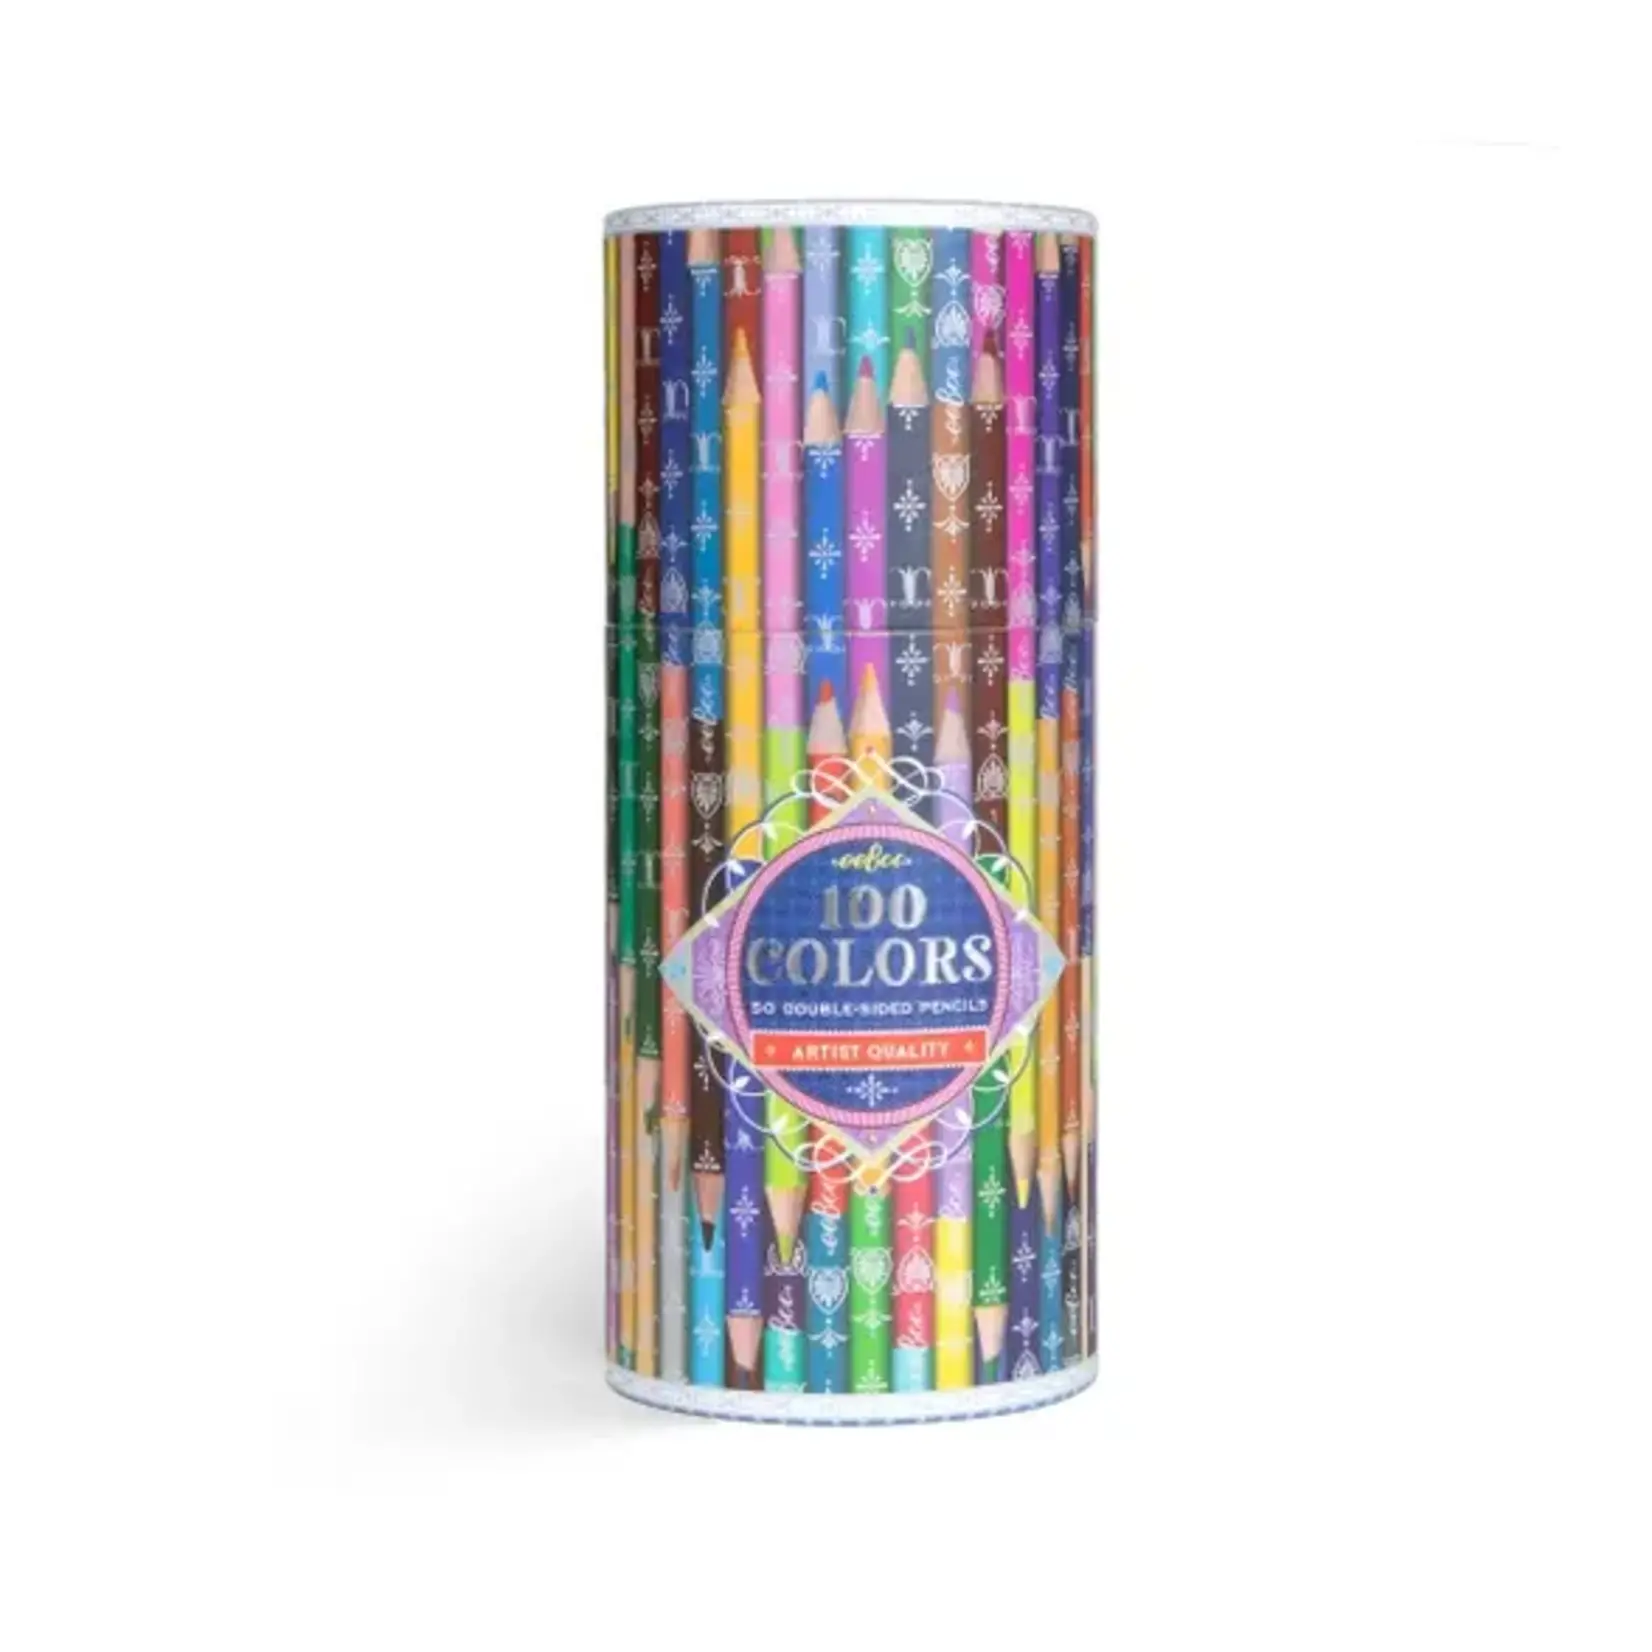 100 Colors 50 Double-Sided Pencils